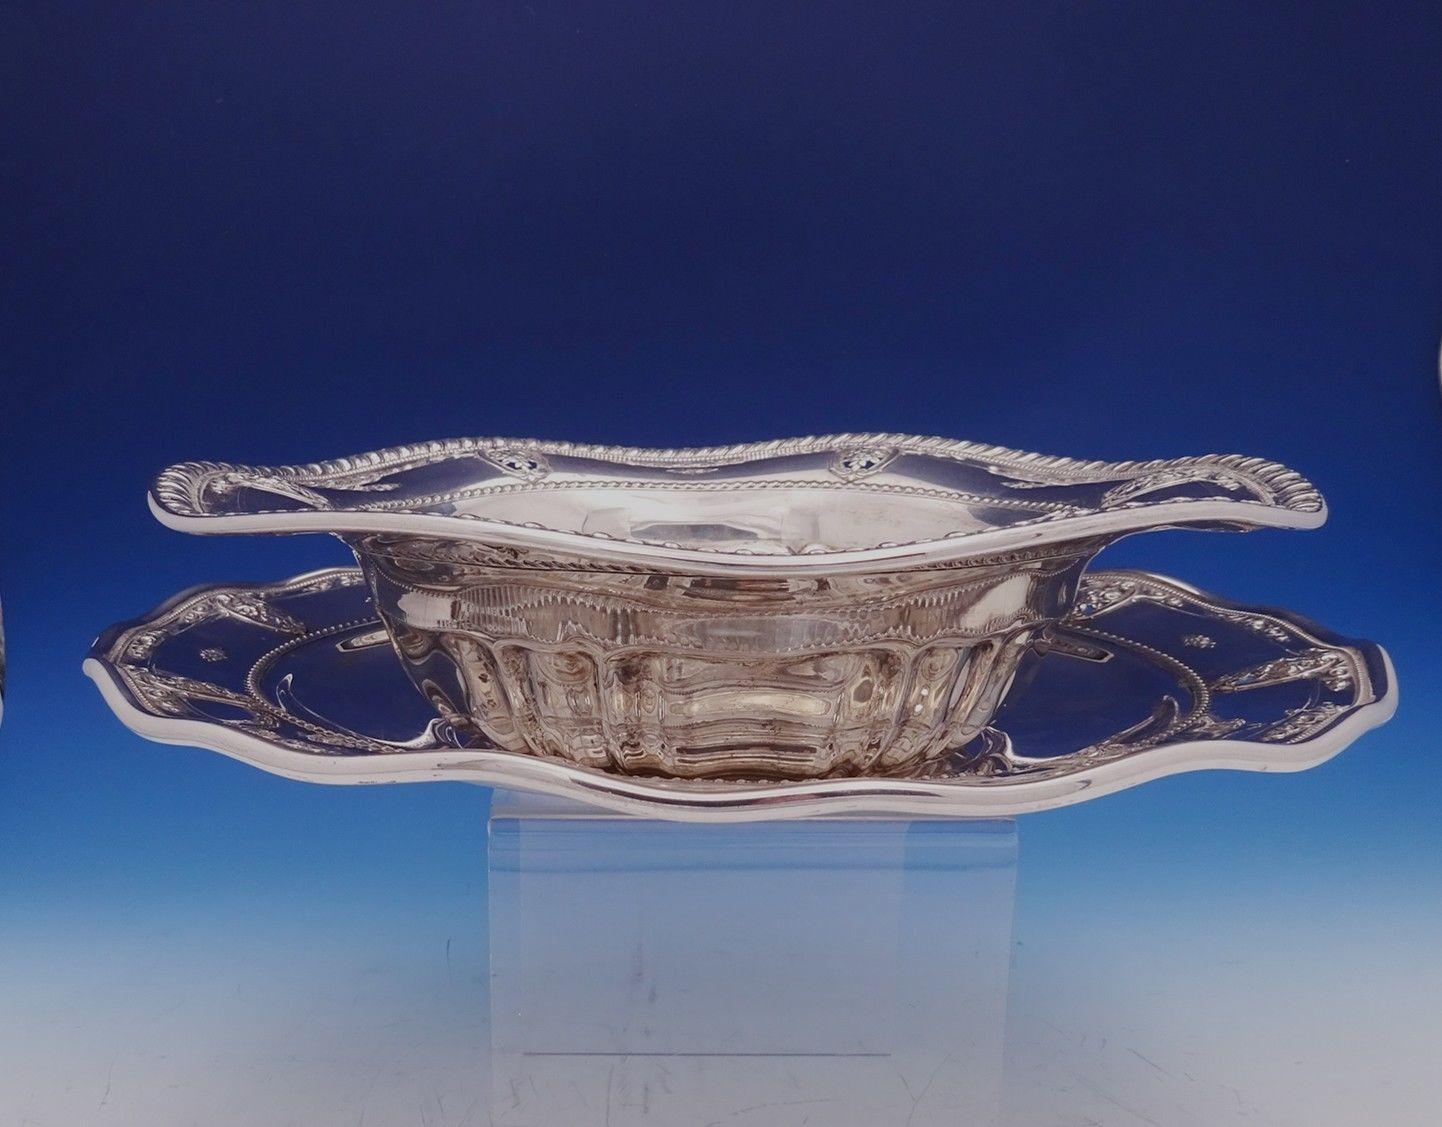 Wonderful rose point by Wallace sterling silver serving bowl with underplate. Both pieces have rippled edges.
The bowl is marked #4611-9, measures 2 3/4 x 11 1/2 in diameter, and weighs 17.2 troy ounces. The plate is marked #4600-9, measures 1 1/8 x